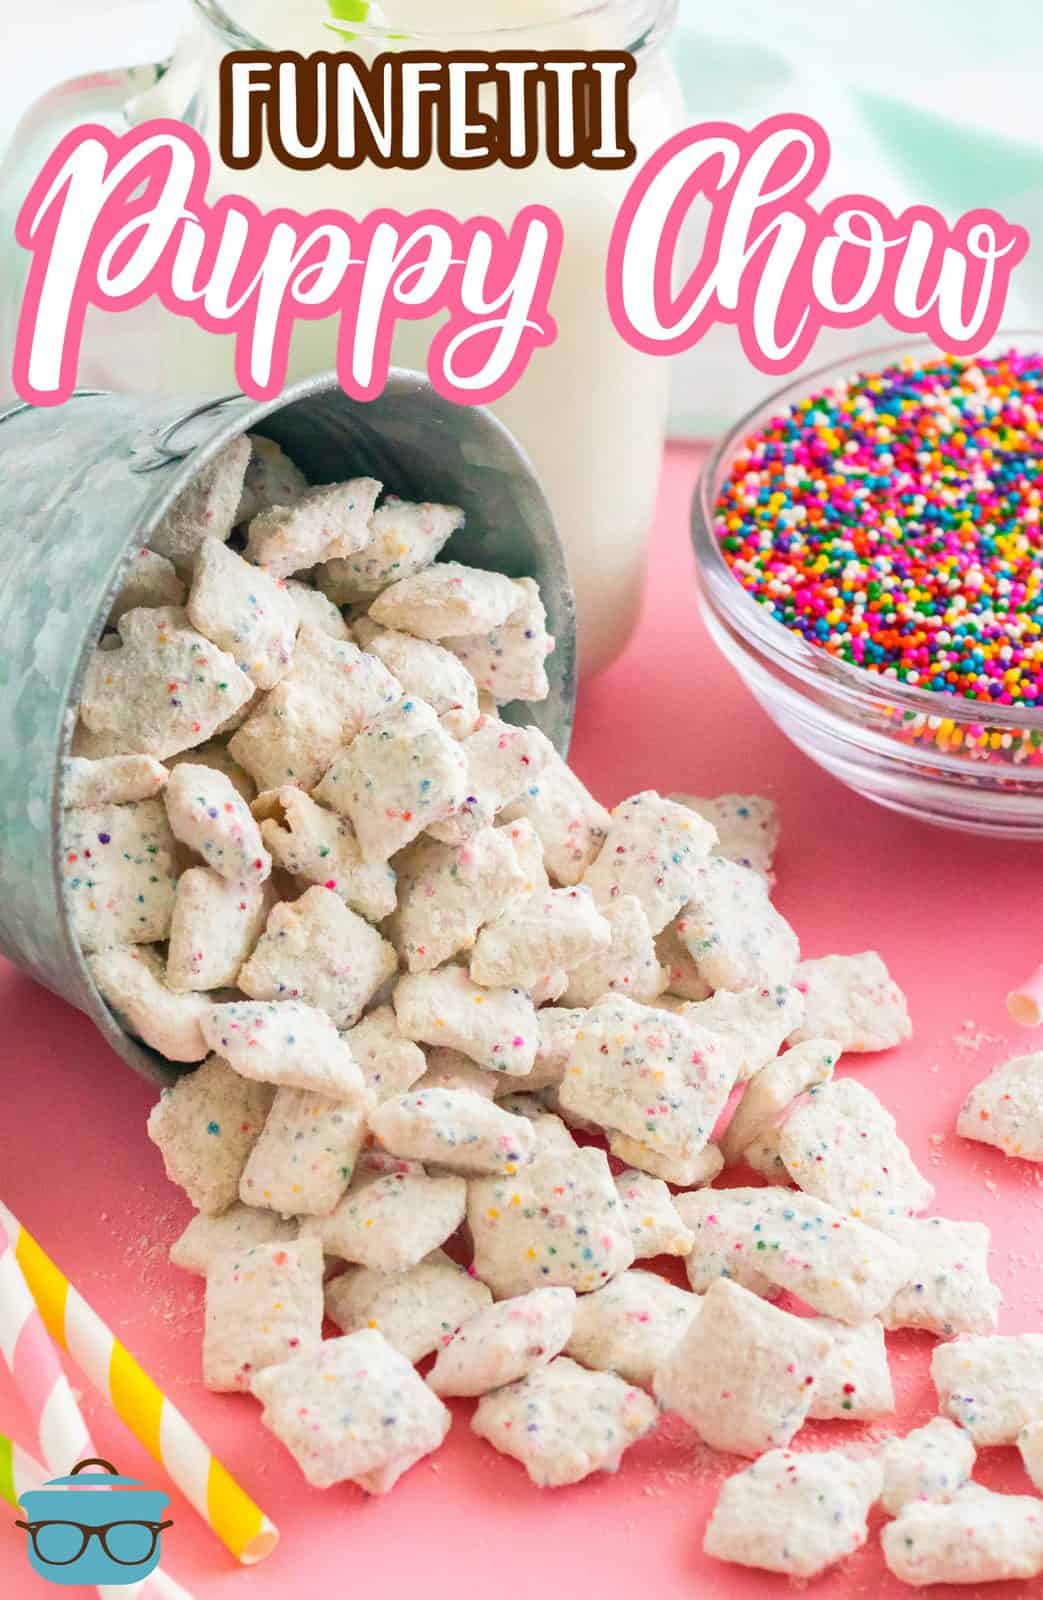 Funfetti Puppy Chow Pinterest image spilling out of container with sprinkles in bowl.